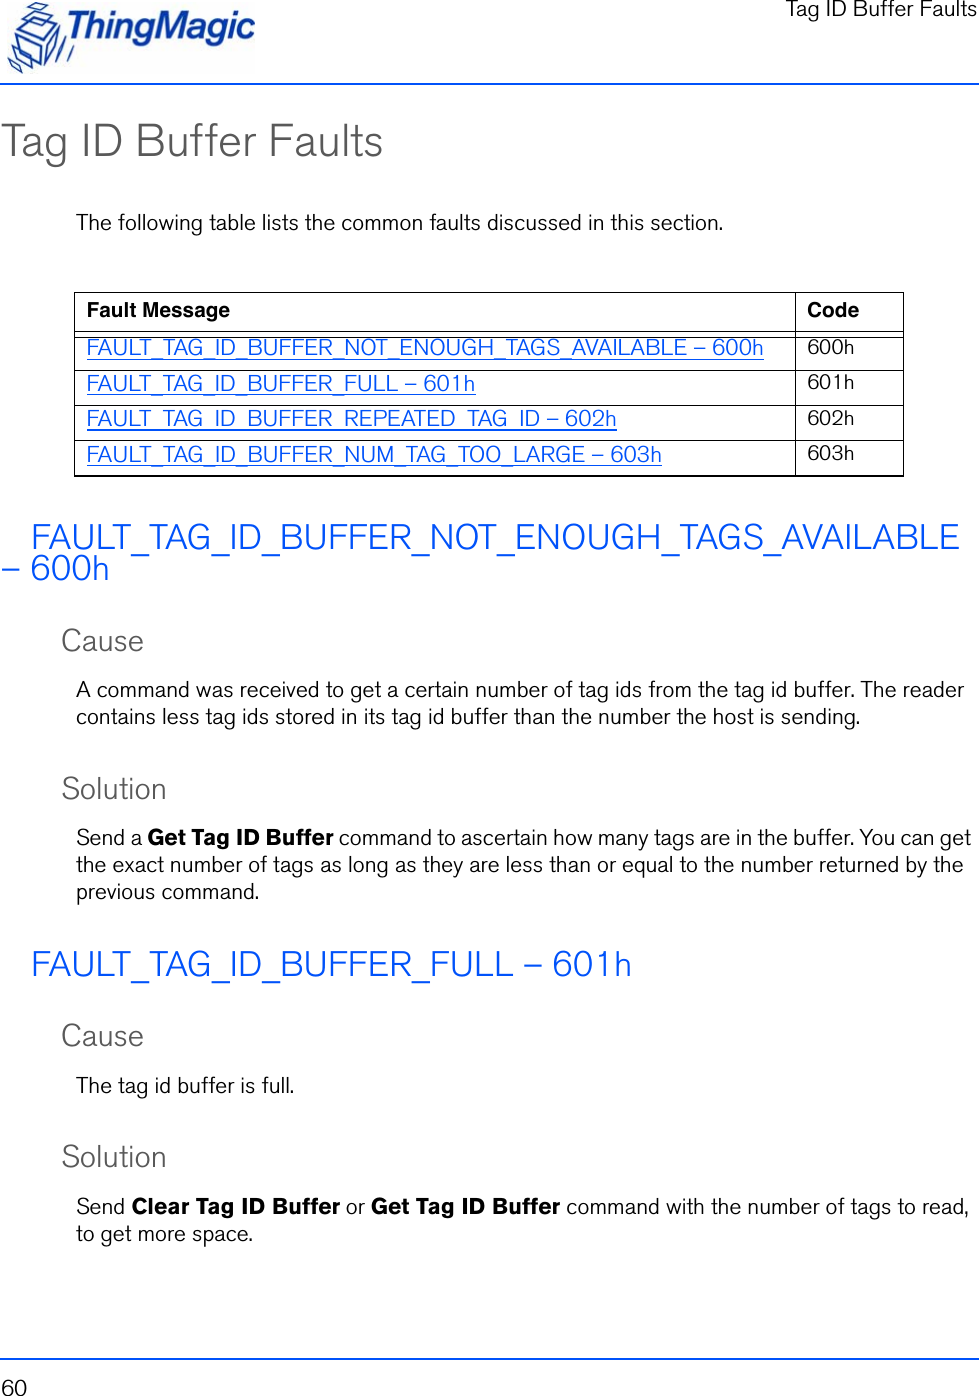 Tag ID Buffer Faults60Tag ID Buffer FaultsThe following table lists the common faults discussed in this section.FAULT_TAG_ID_BUFFER_NOT_ENOUGH_TAGS_AVAILABLE – 600hCauseA command was received to get a certain number of tag ids from the tag id buffer. The reader contains less tag ids stored in its tag id buffer than the number the host is sending.SolutionSend a Get Tag ID Buffer command to ascertain how many tags are in the buffer. You can get the exact number of tags as long as they are less than or equal to the number returned by the previous command.FAULT_TAG_ID_BUFFER_FULL – 601hCauseThe tag id buffer is full.SolutionSend Clear Tag ID Buffer or Get Tag ID Buffer command with the number of tags to read, to get more space.Fault Message CodeFAULT_TAG_ID_BUFFER_NOT_ENOUGH_TAGS_AVAILABLE – 600h 600hFAULT_TAG_ID_BUFFER_FULL – 601h 601hFAULT_TAG_ID_BUFFER_REPEATED_TAG_ID – 602h 602hFAULT_TAG_ID_BUFFER_NUM_TAG_TOO_LARGE – 603h 603h